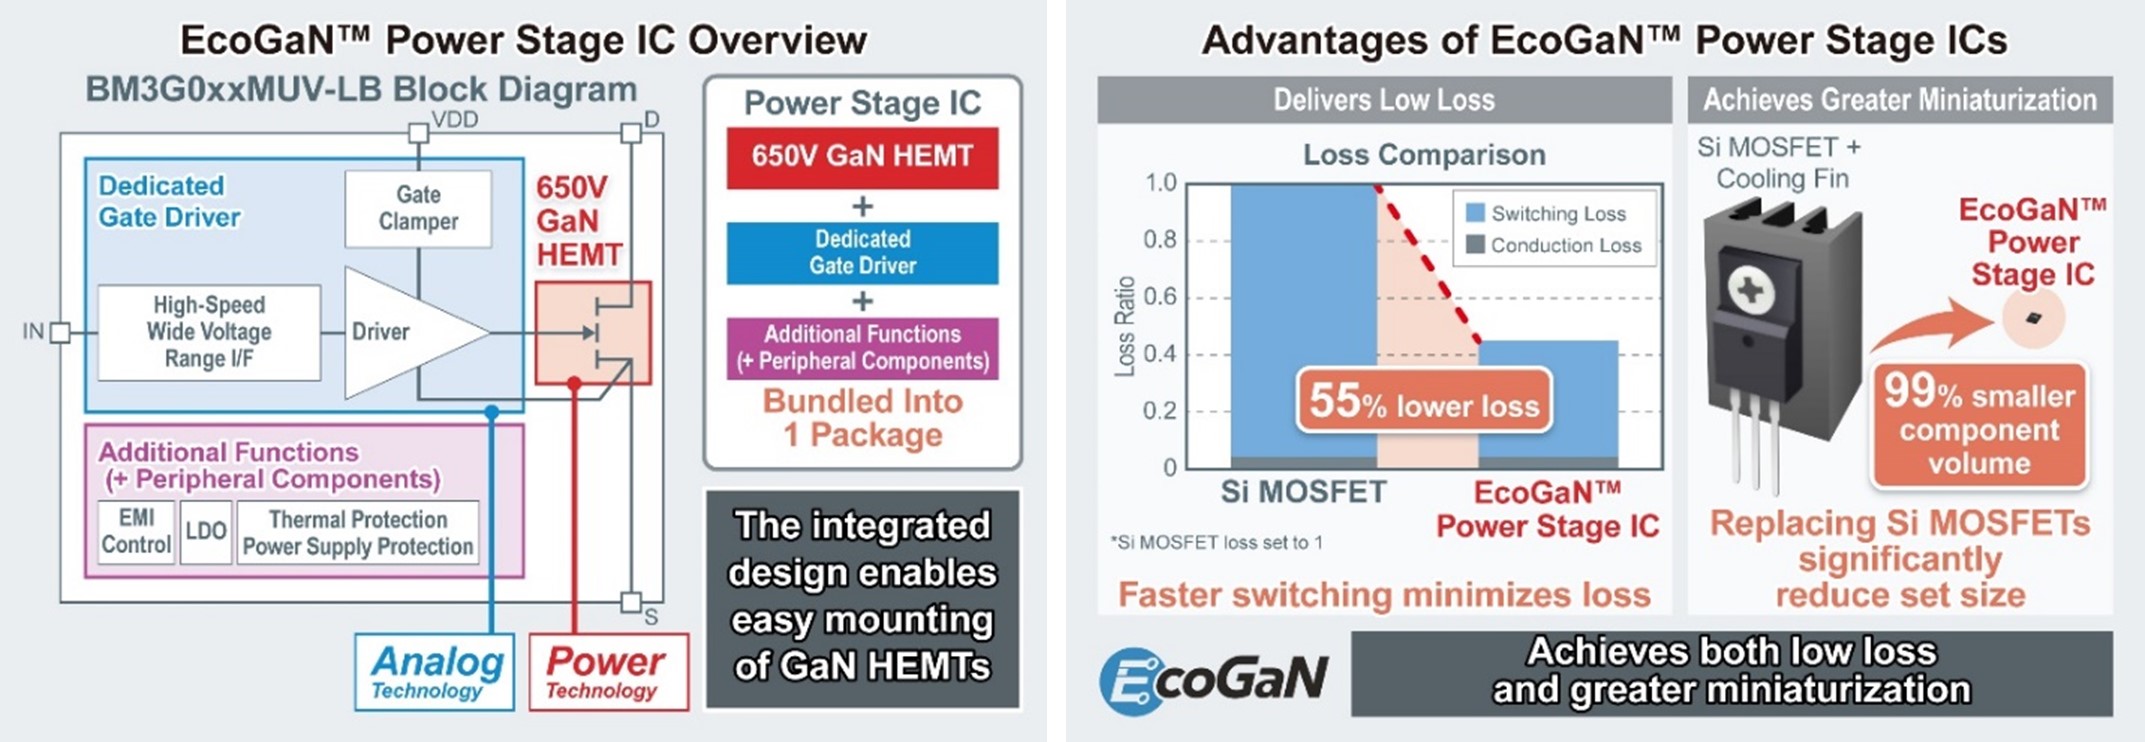 EcoGaN power stage IC overview and advantages